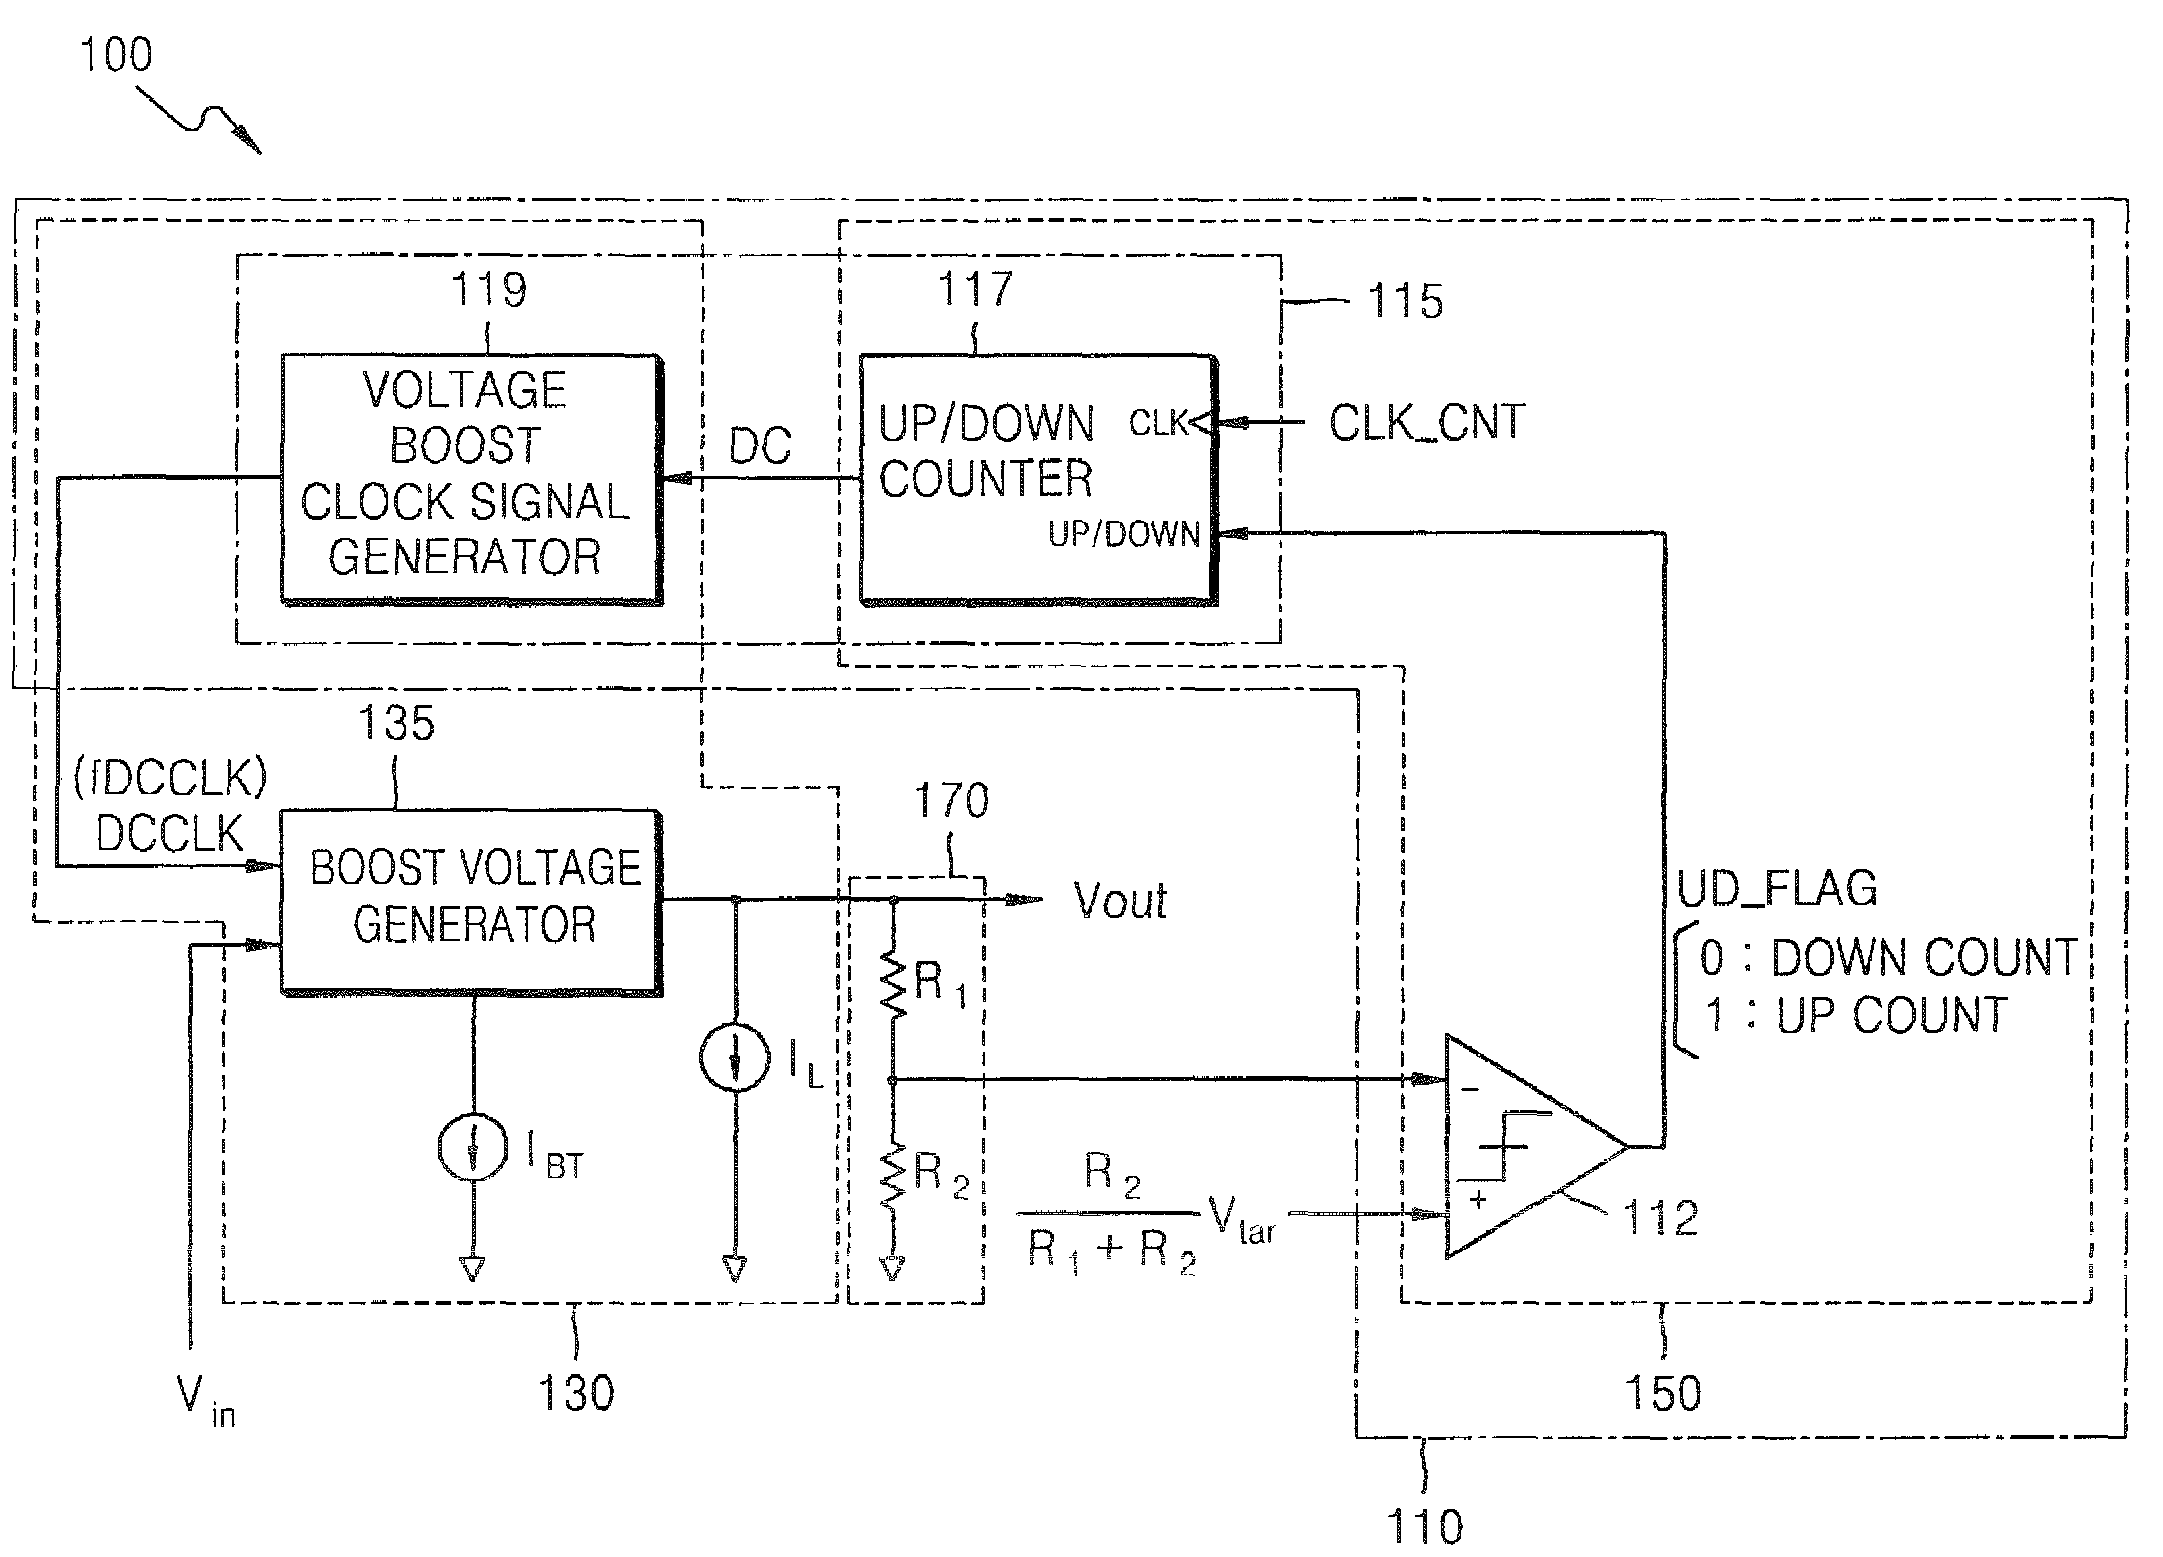 Voltage boost circuit and voltage boosting method using voltage boost clock signal with varying frequency